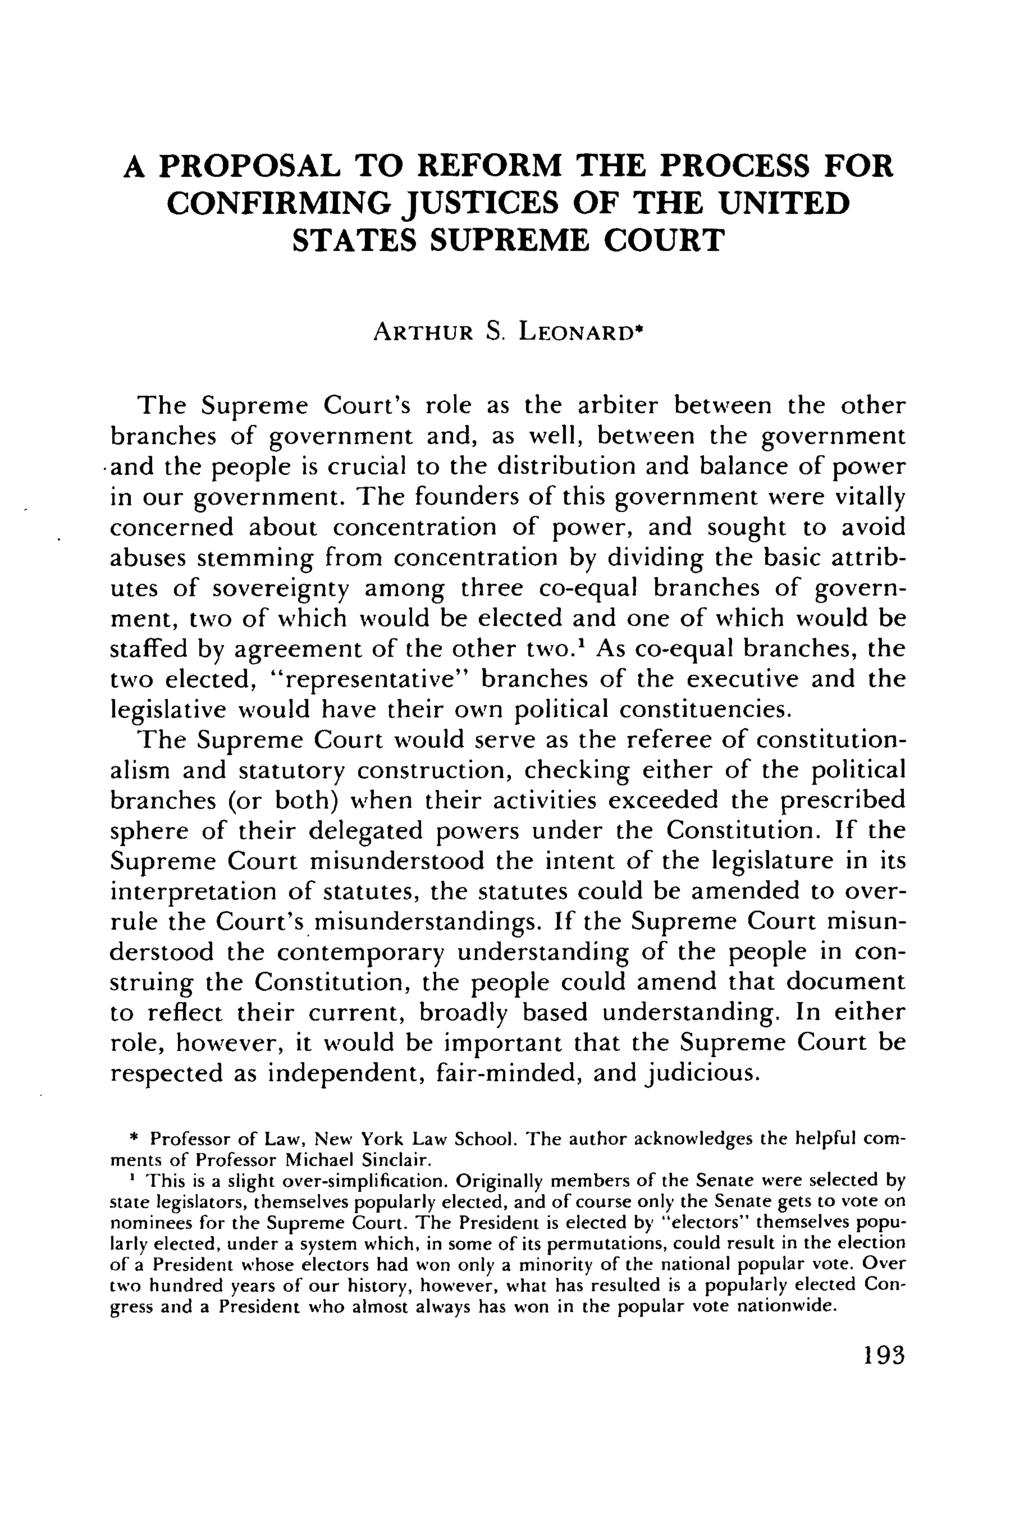 A PROPOSAL TO REFORM THE PROCESS FOR CONFIRMING JUSTICES OF THE UNITED STATES SUPREME COURT ARTHUR S.